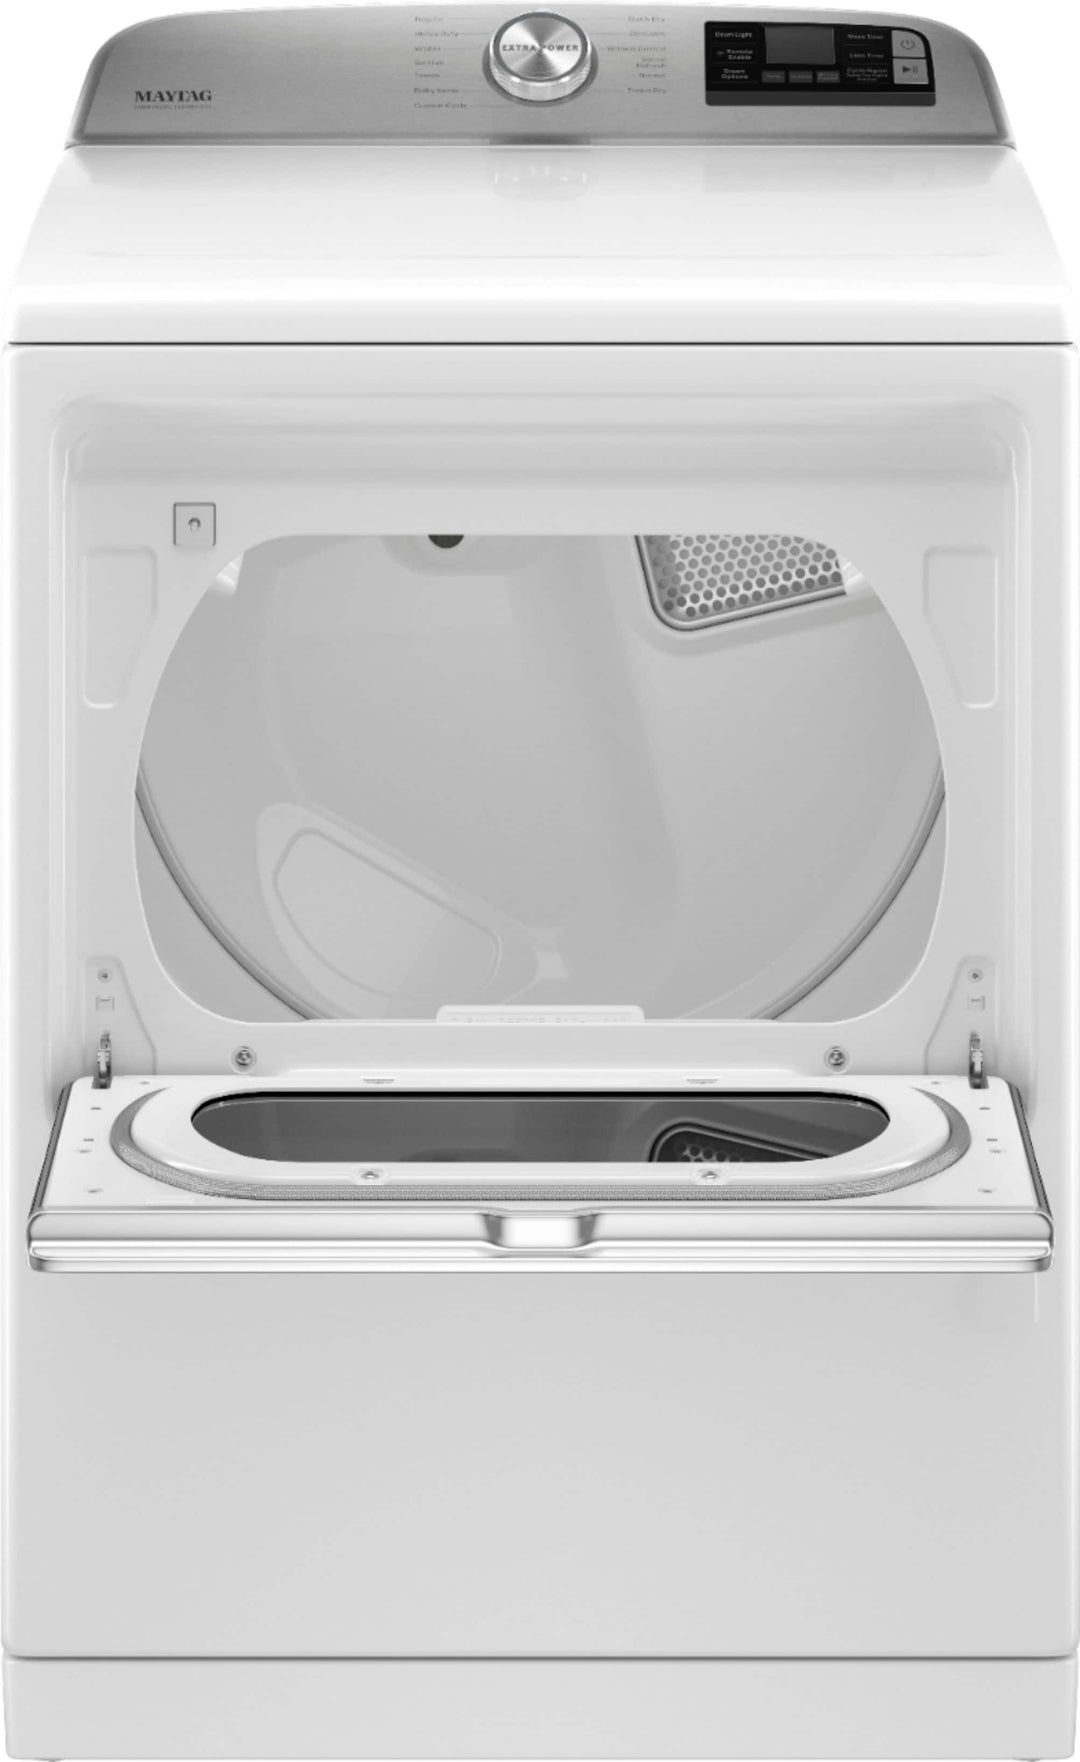 Maytag - 7.4 Cu. Ft. Smart Gas Dryer with Steam and Extra Power Button - White_11